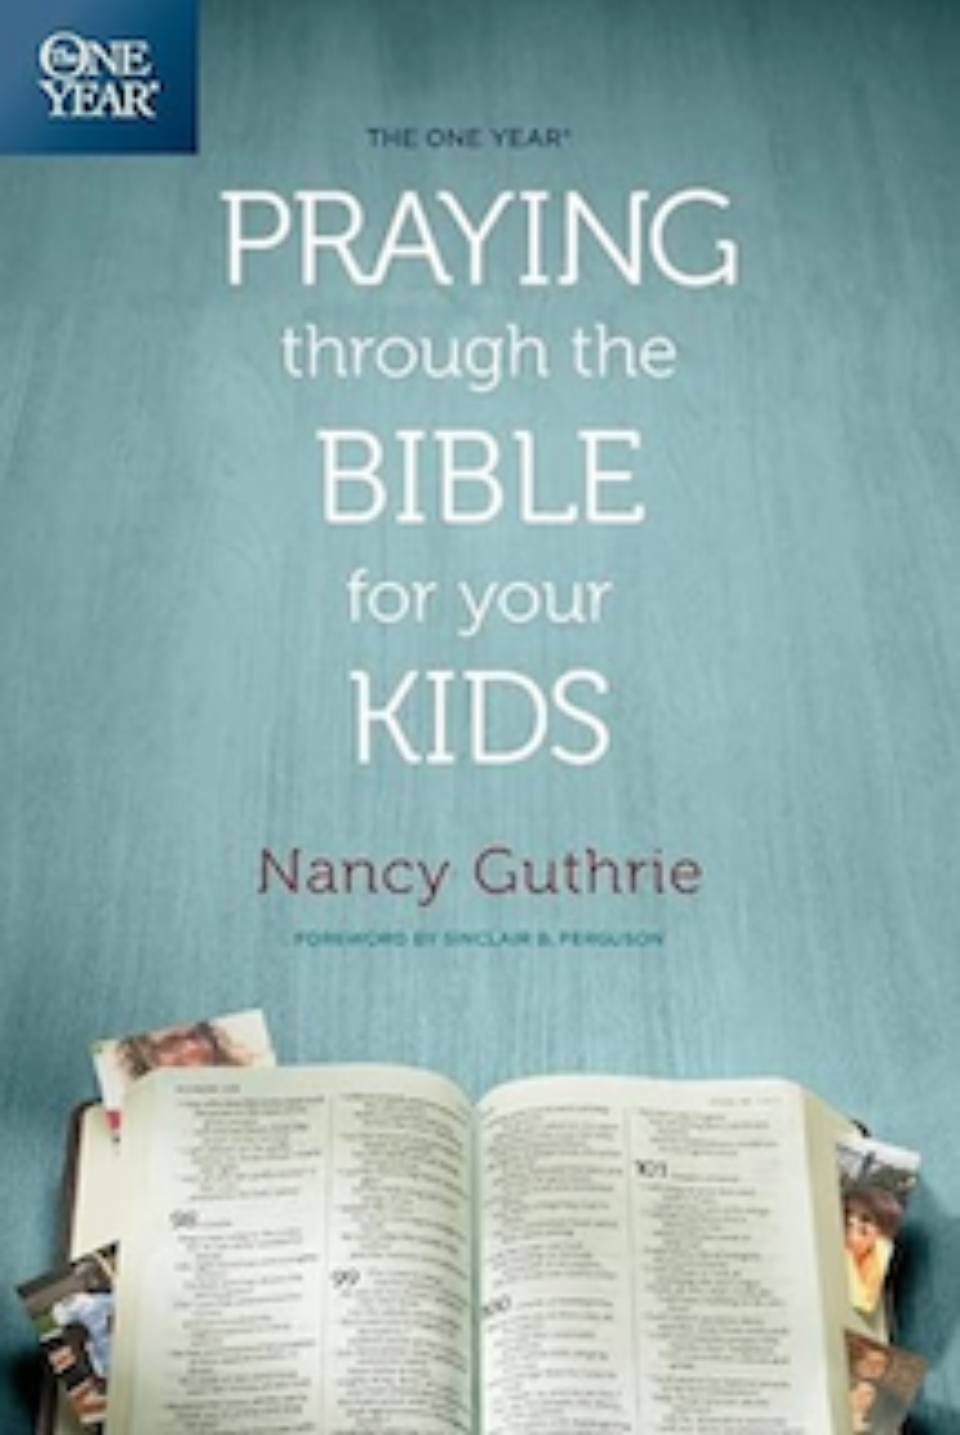 Congrats to Luann who won this fabulous tool to pray through the Bible for your kids.